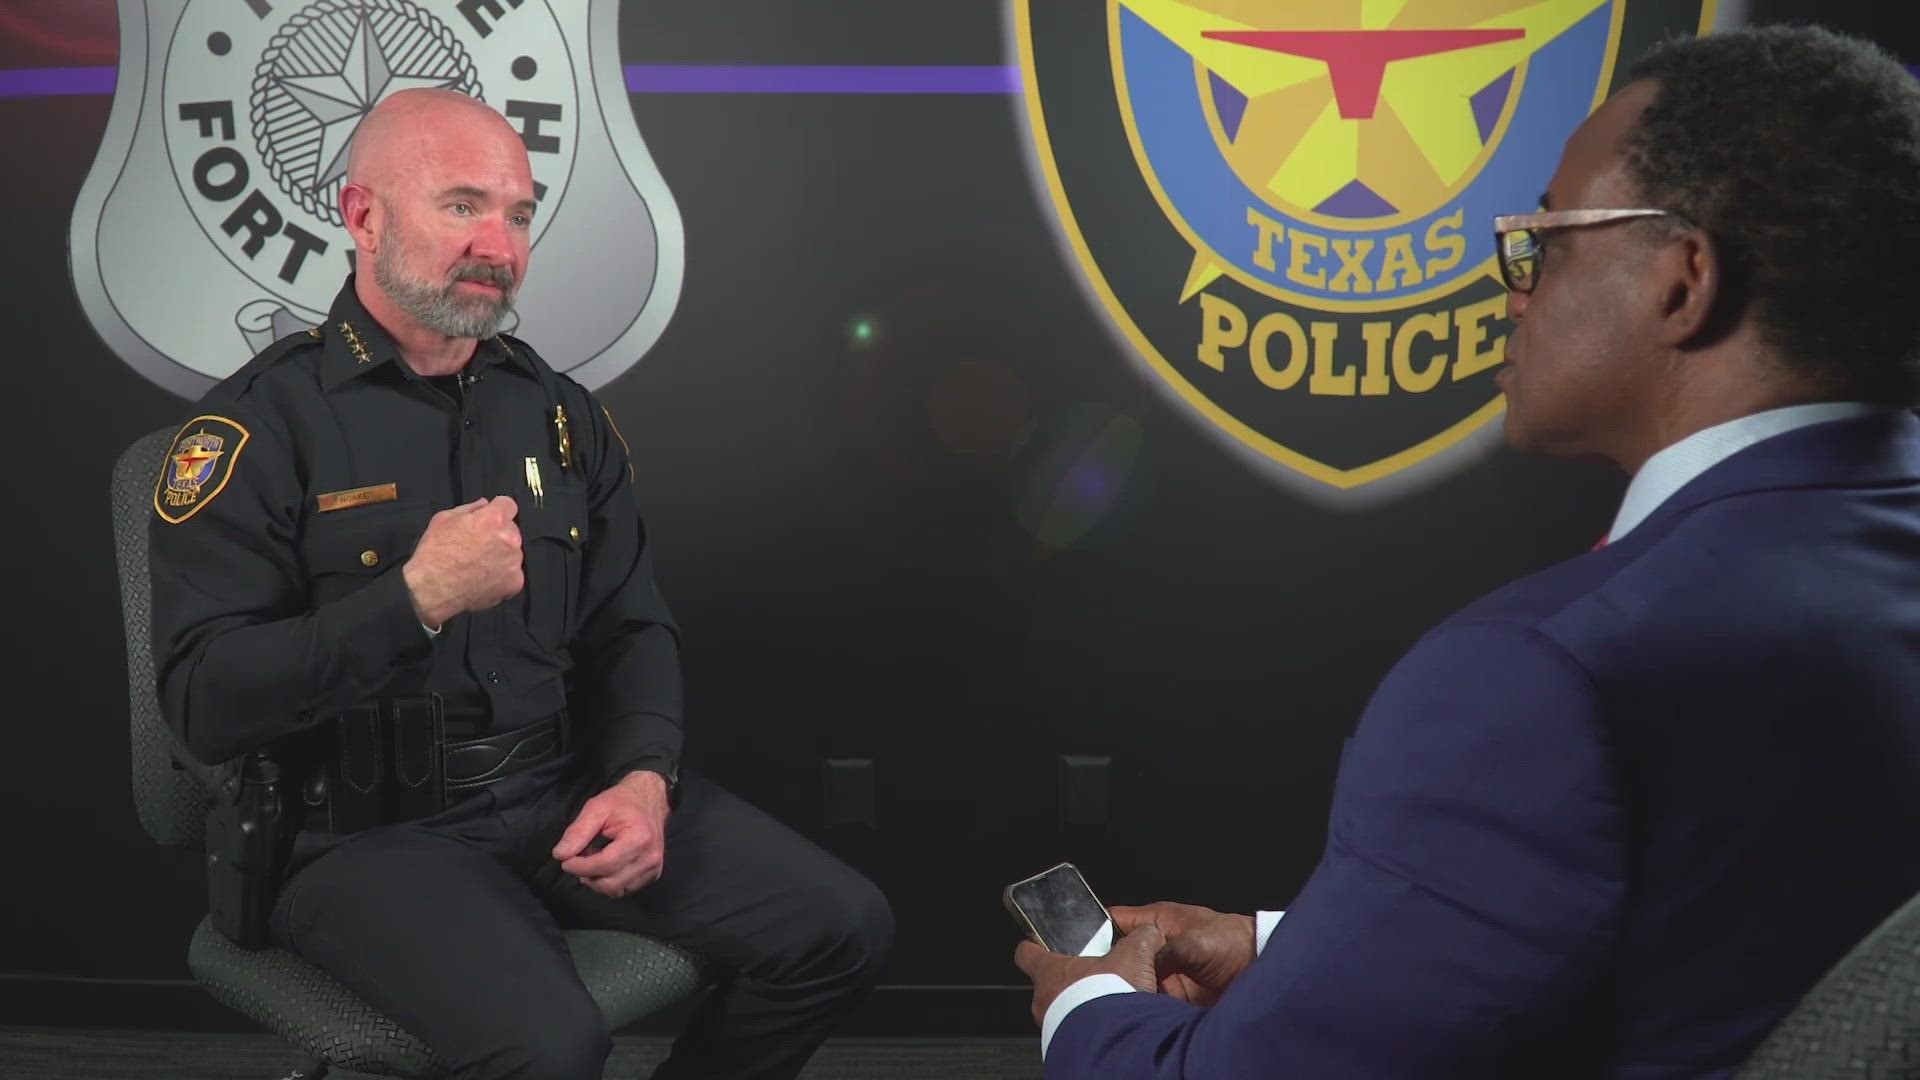 Chief Neil Noakes talks about fighting crime, his police advisory board, diversity, and what he would say to Atatiana Jefferson's nephew Zion Carr